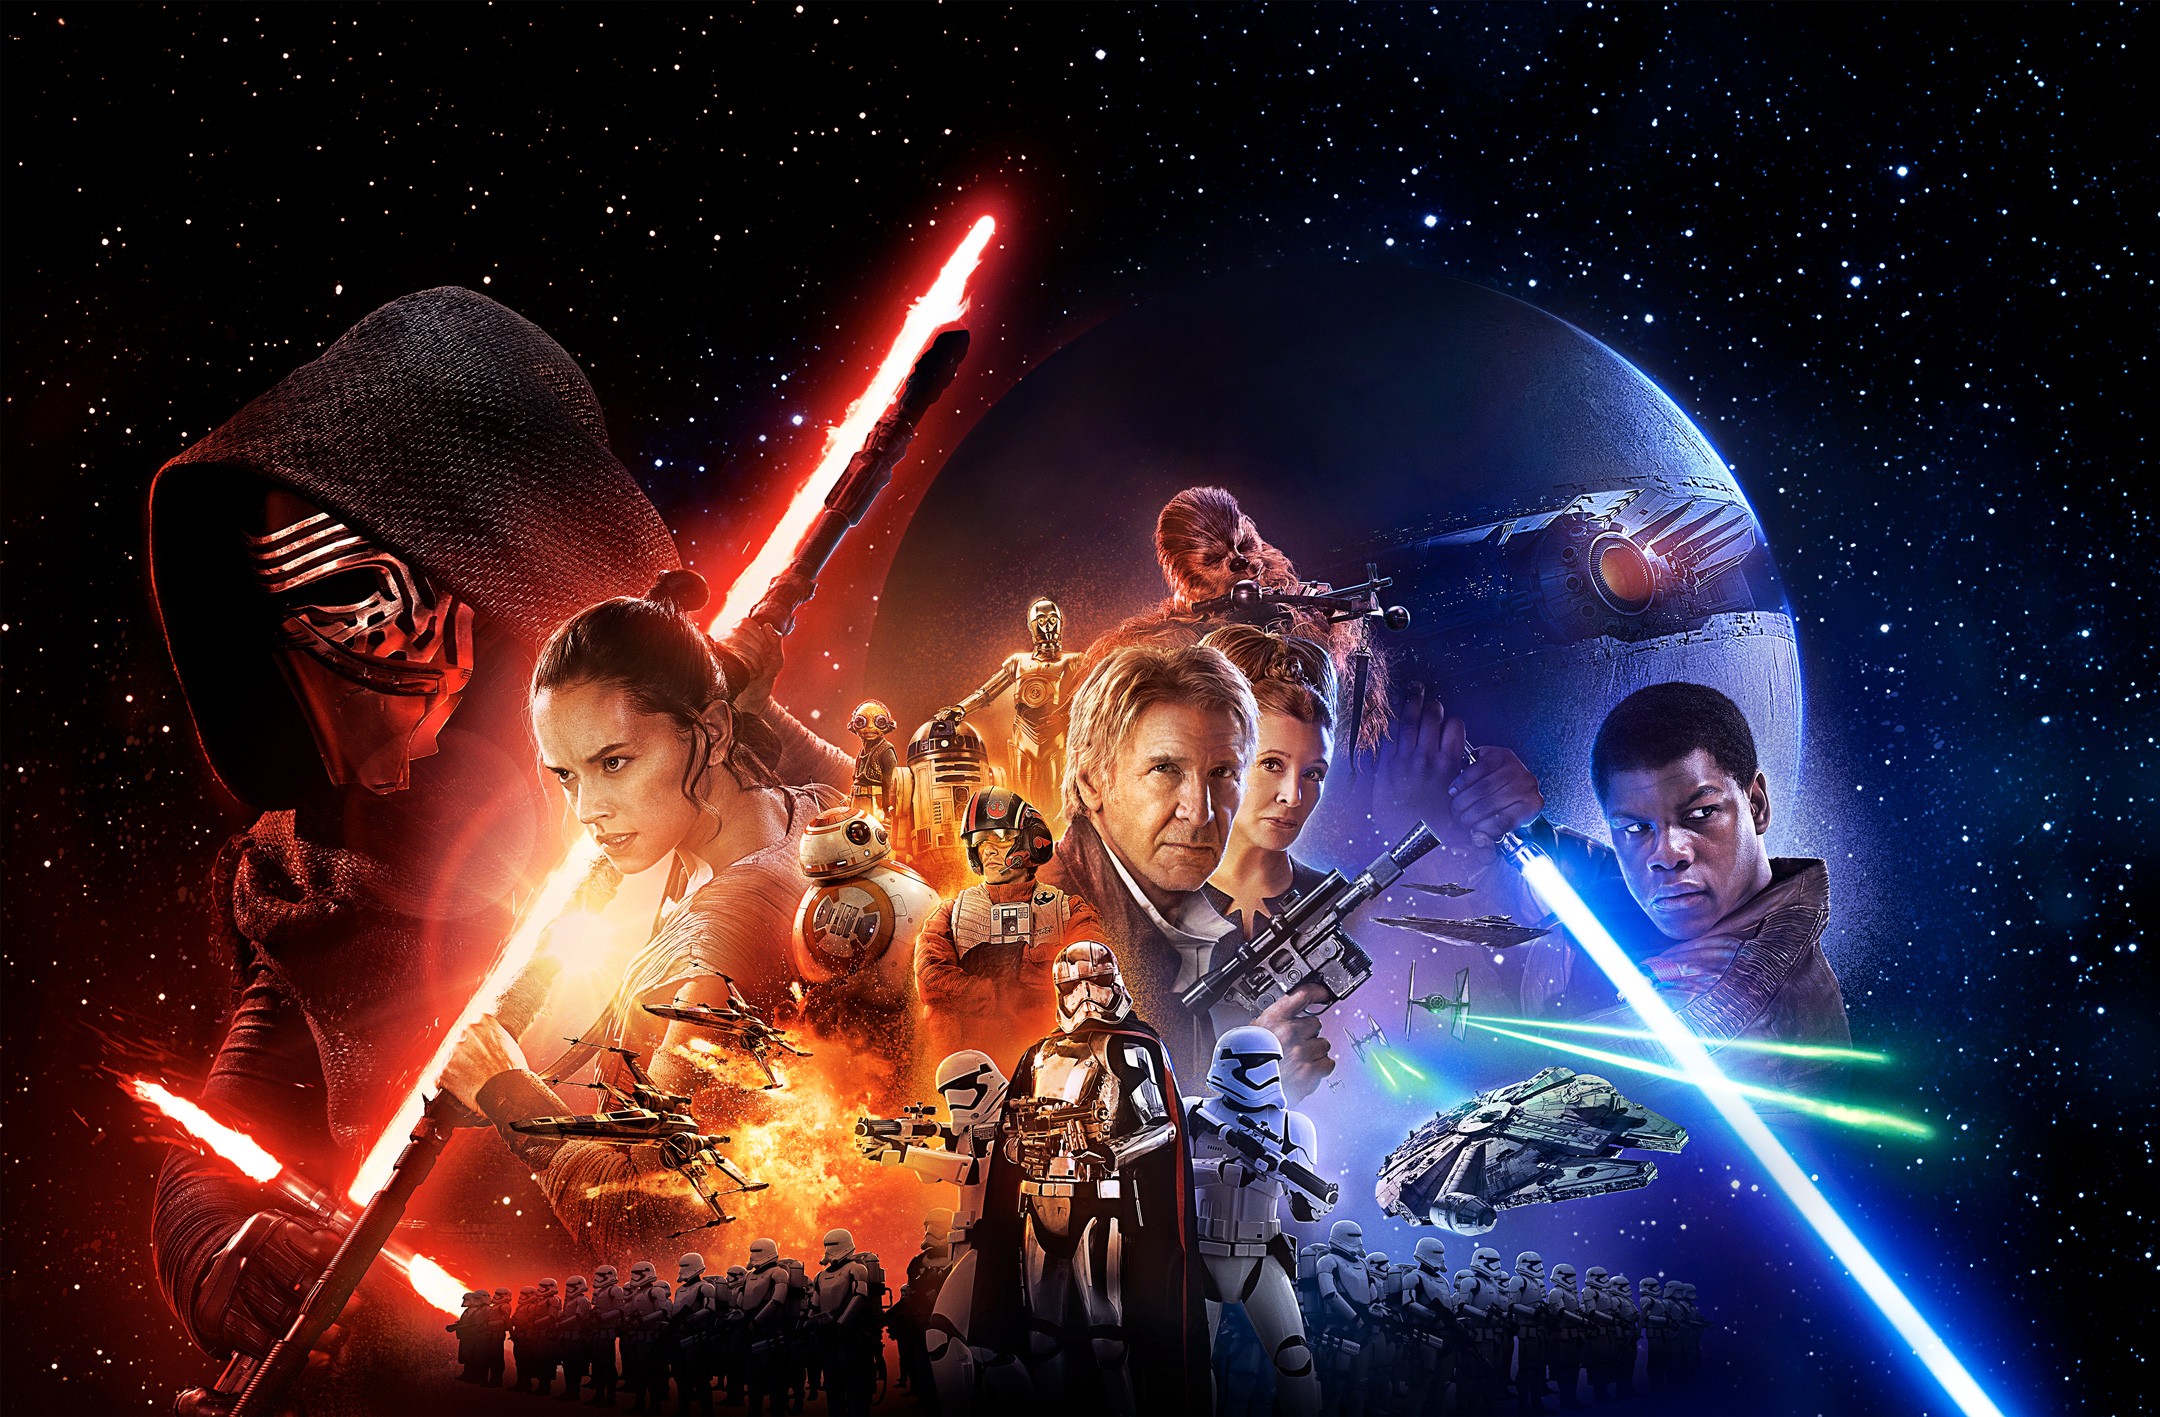 Star Wars The Force Awakens Star Wars Movies Han Solo Kylo Ren The New Order Star Wars Rey Rey From  2160x1417